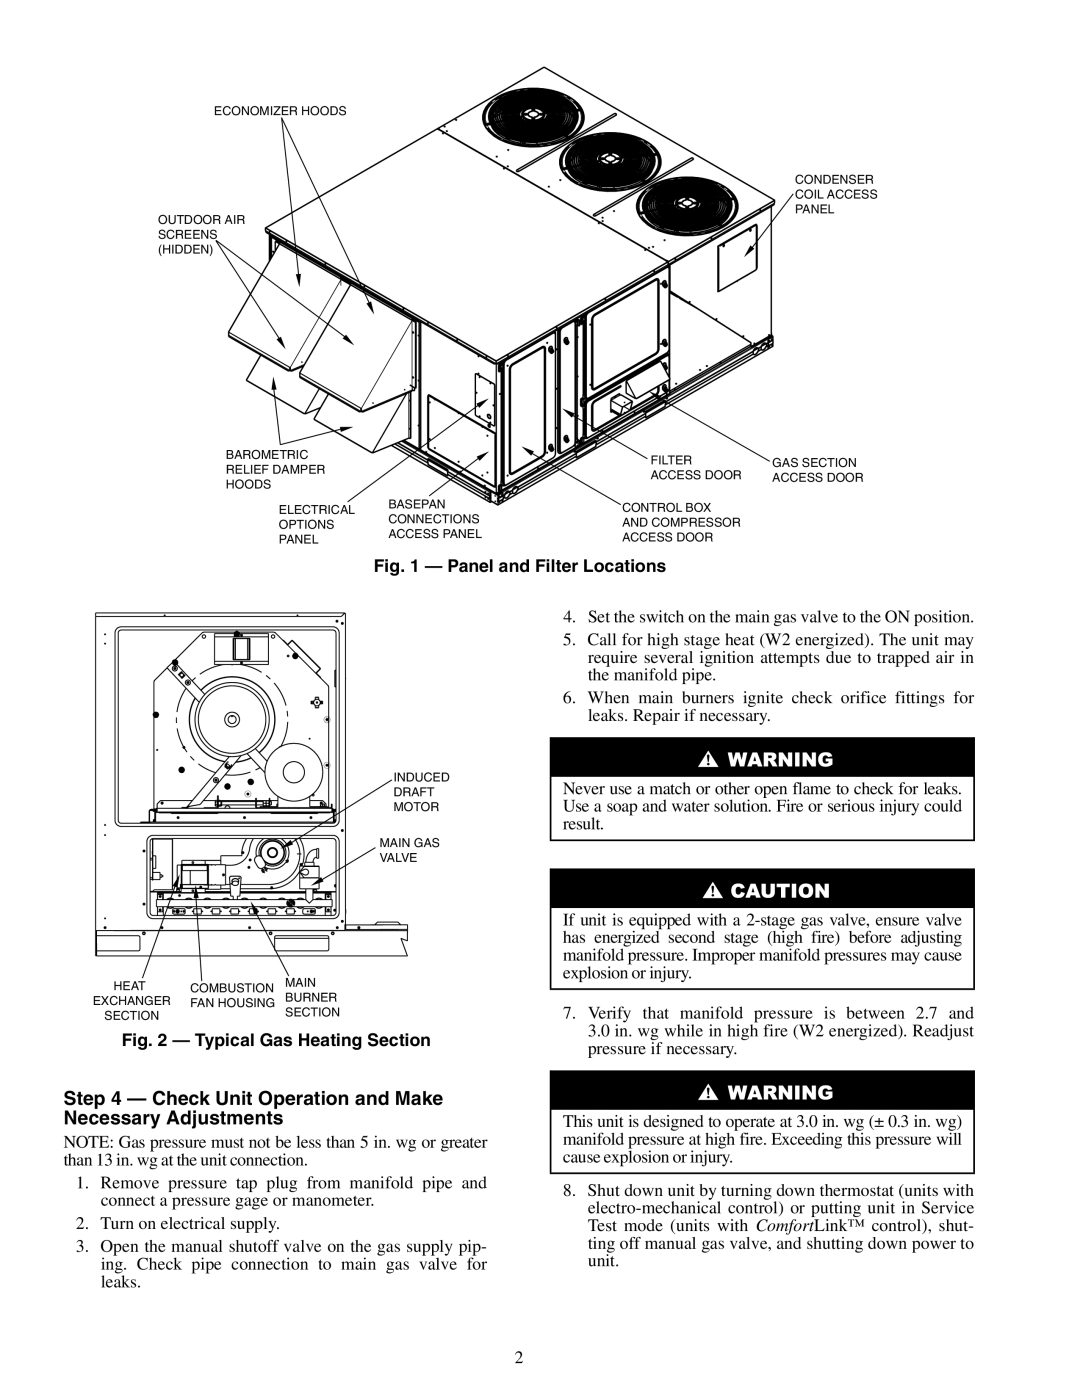 Carrier 48PG16 installation instructions Check Unit Operation and Make Necessary Adjustments, Panel and Filter Locations 